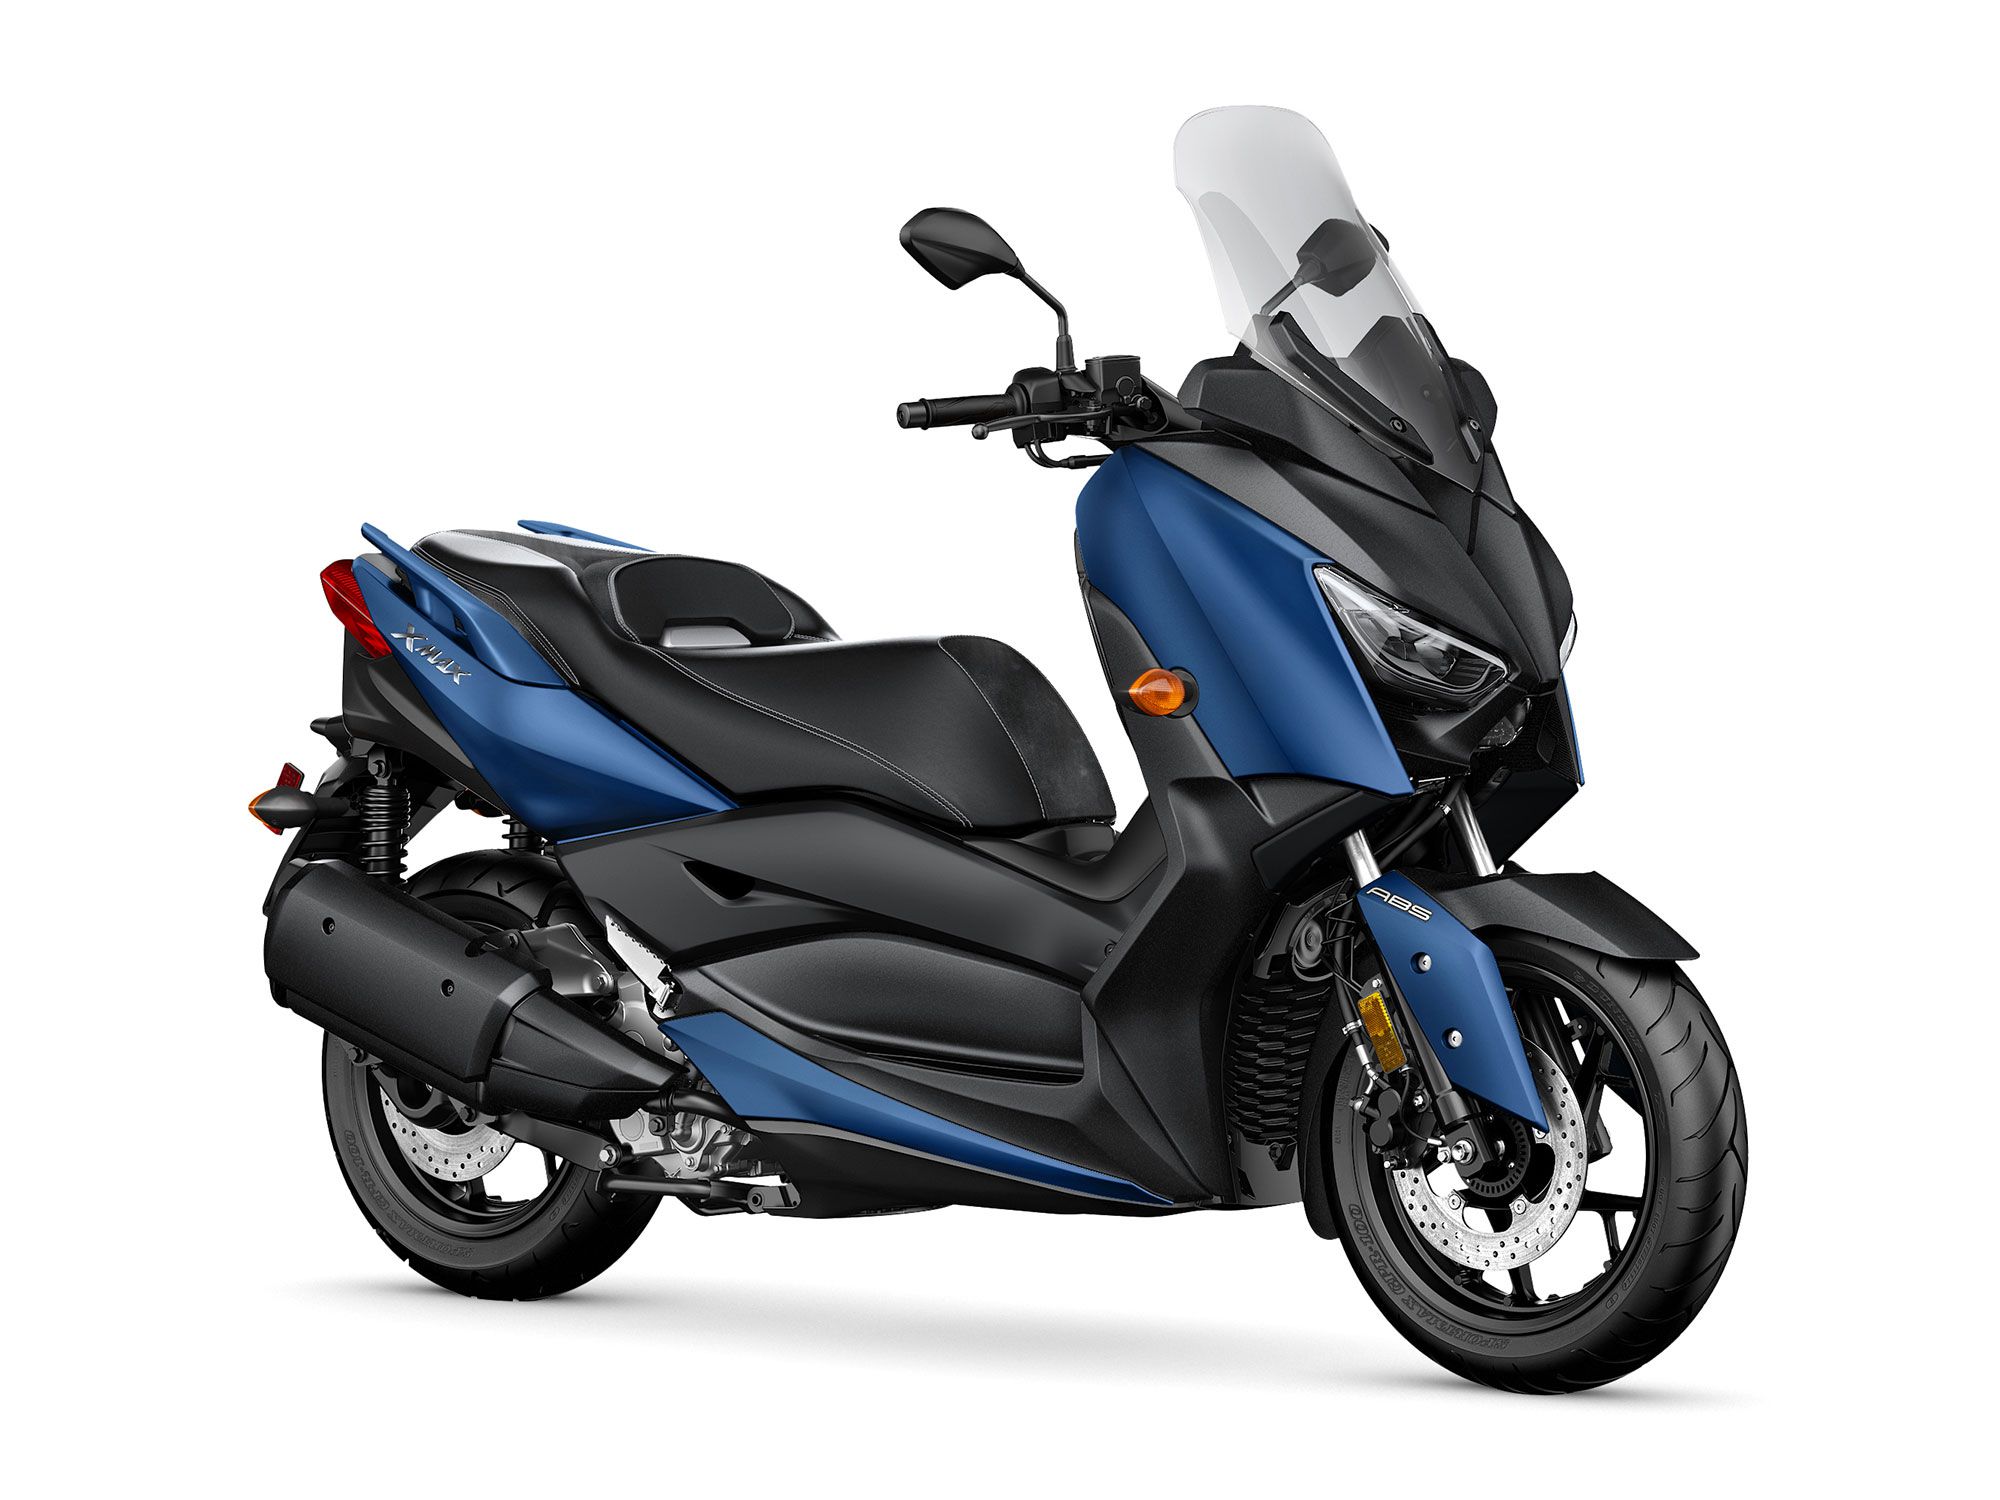 Yamaha’s XMAX scooter is a great example of a CVT machine that will do just about anything you need in town.